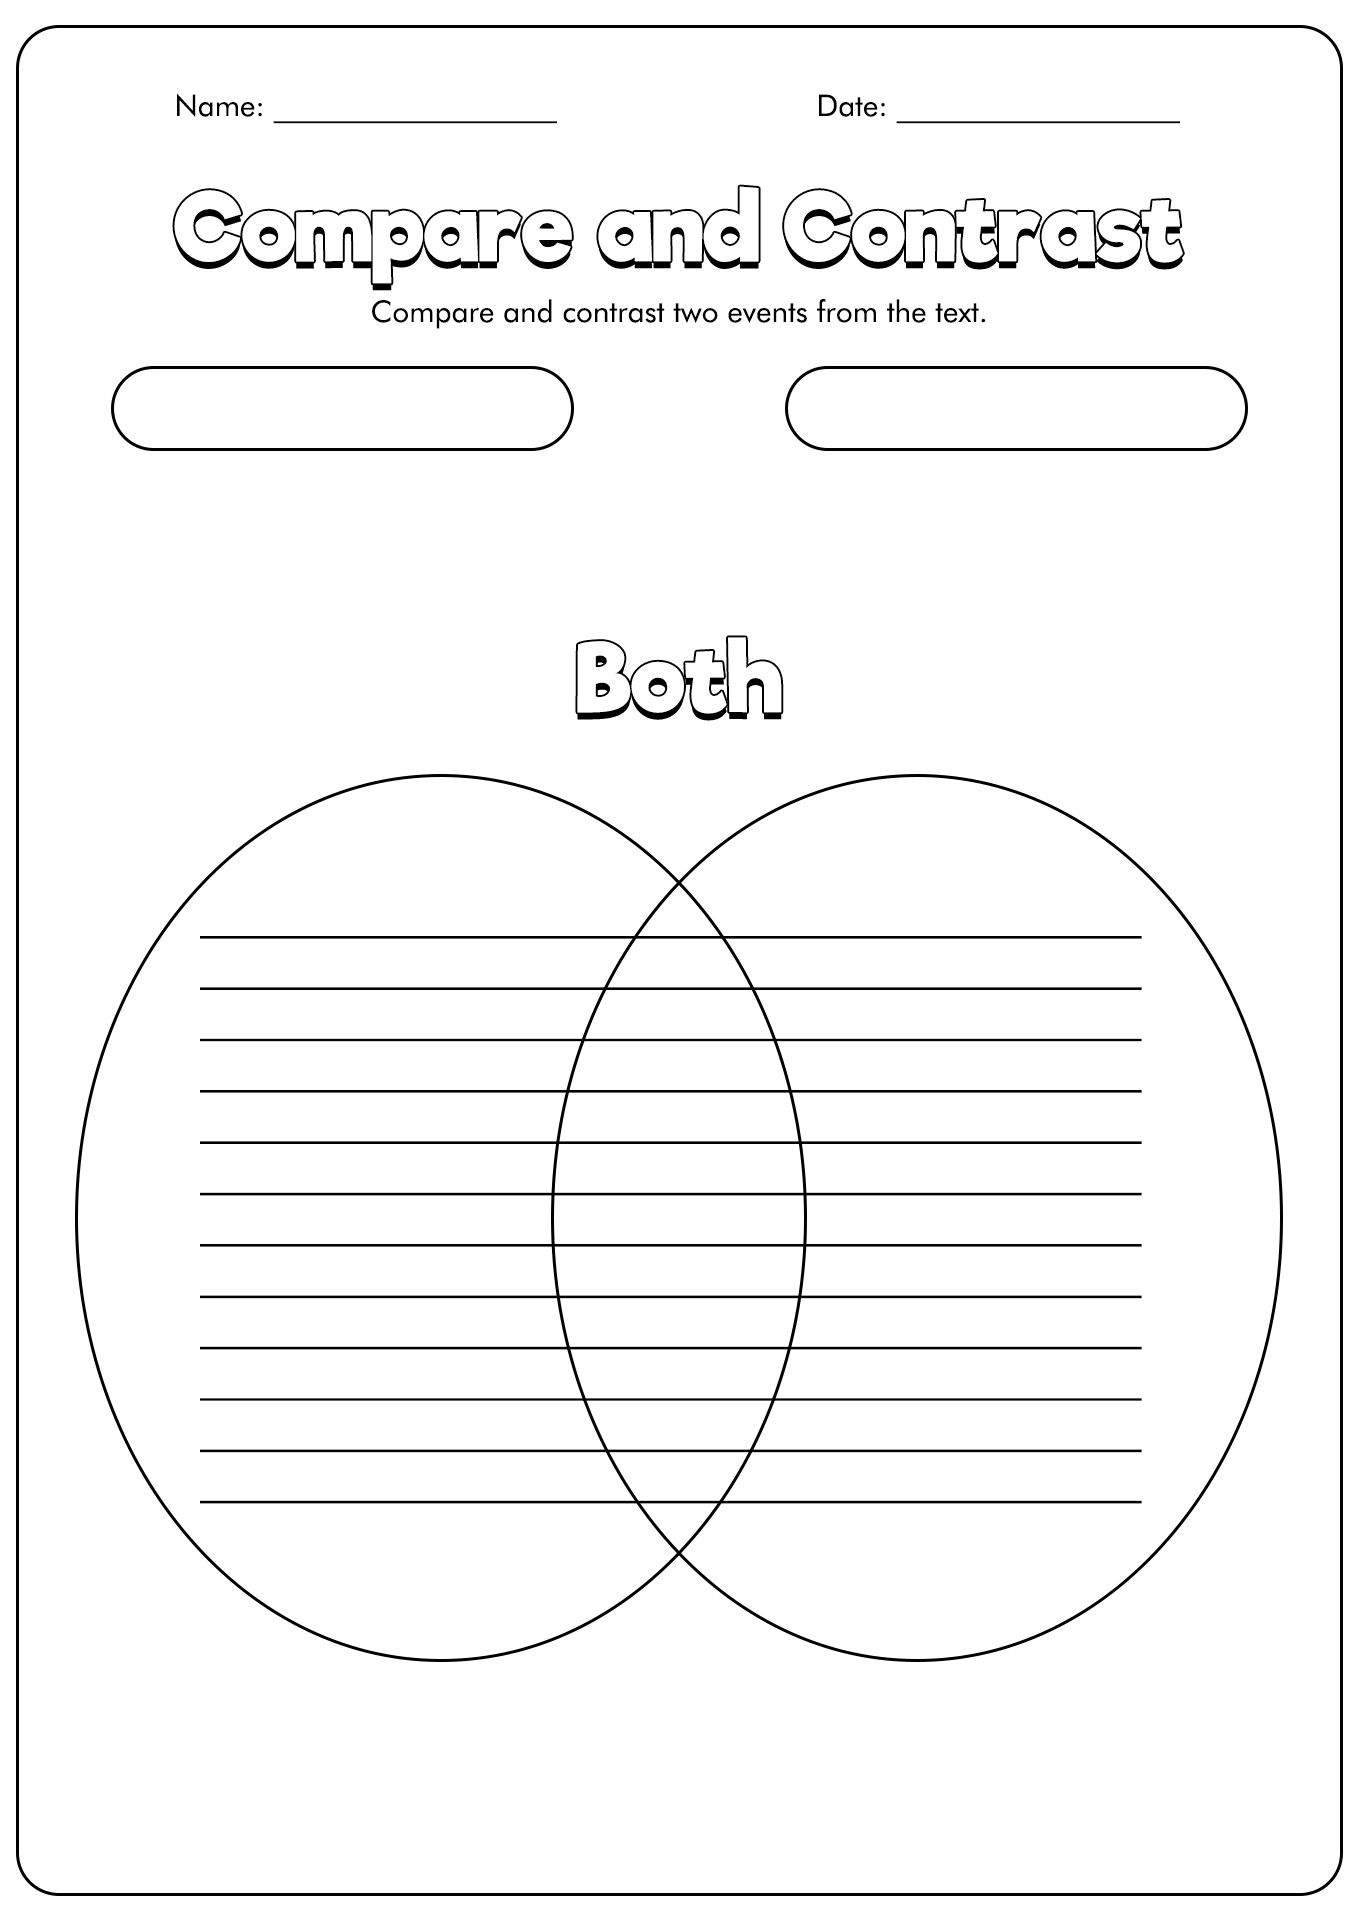 15-best-images-of-blank-compare-and-contrast-worksheets-compare-and